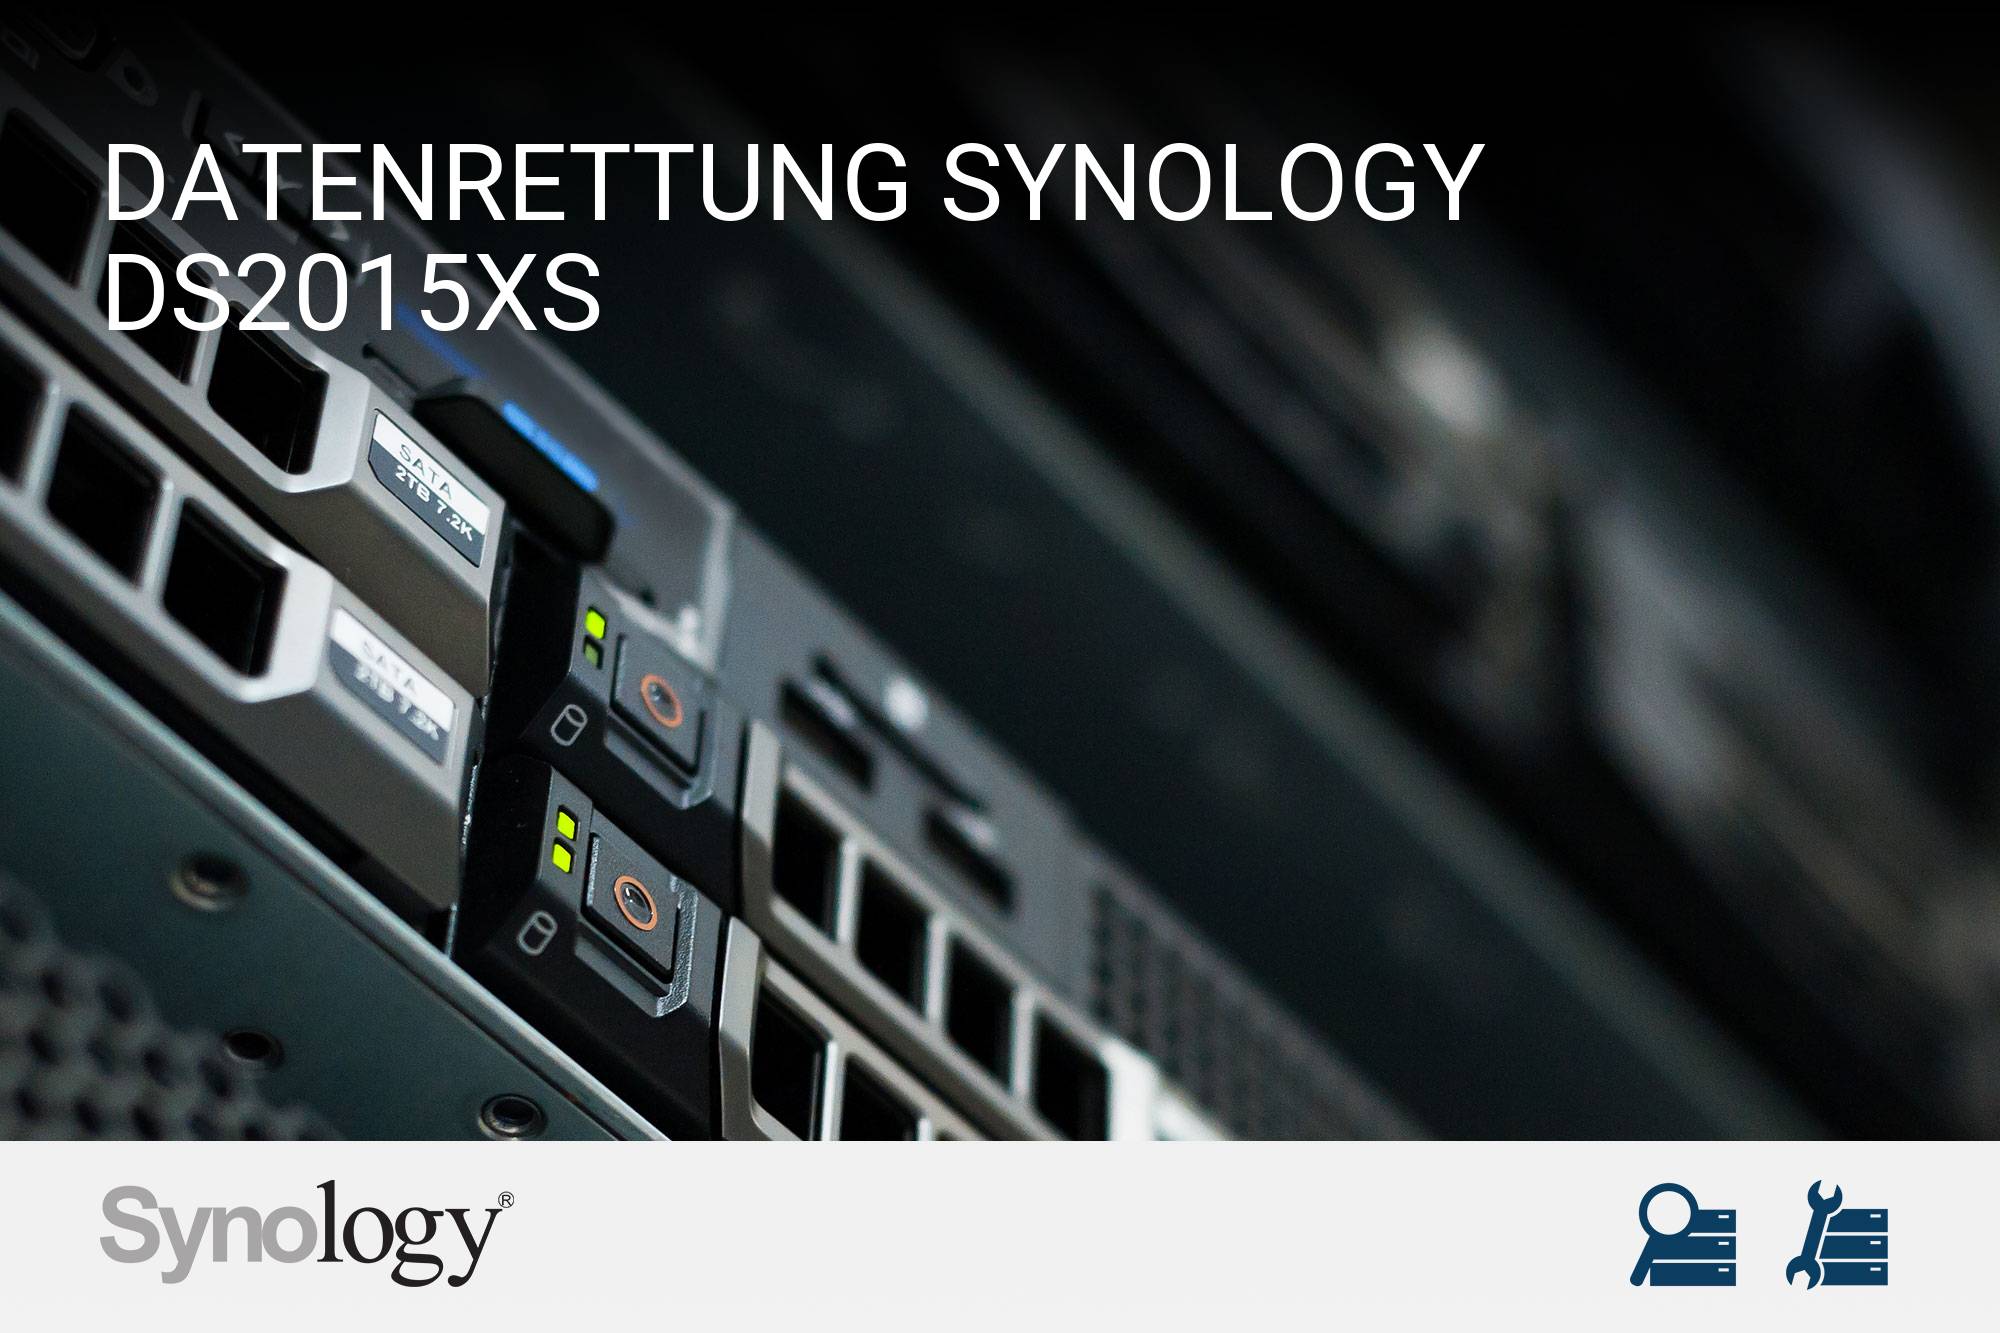 Synology DS2015xs